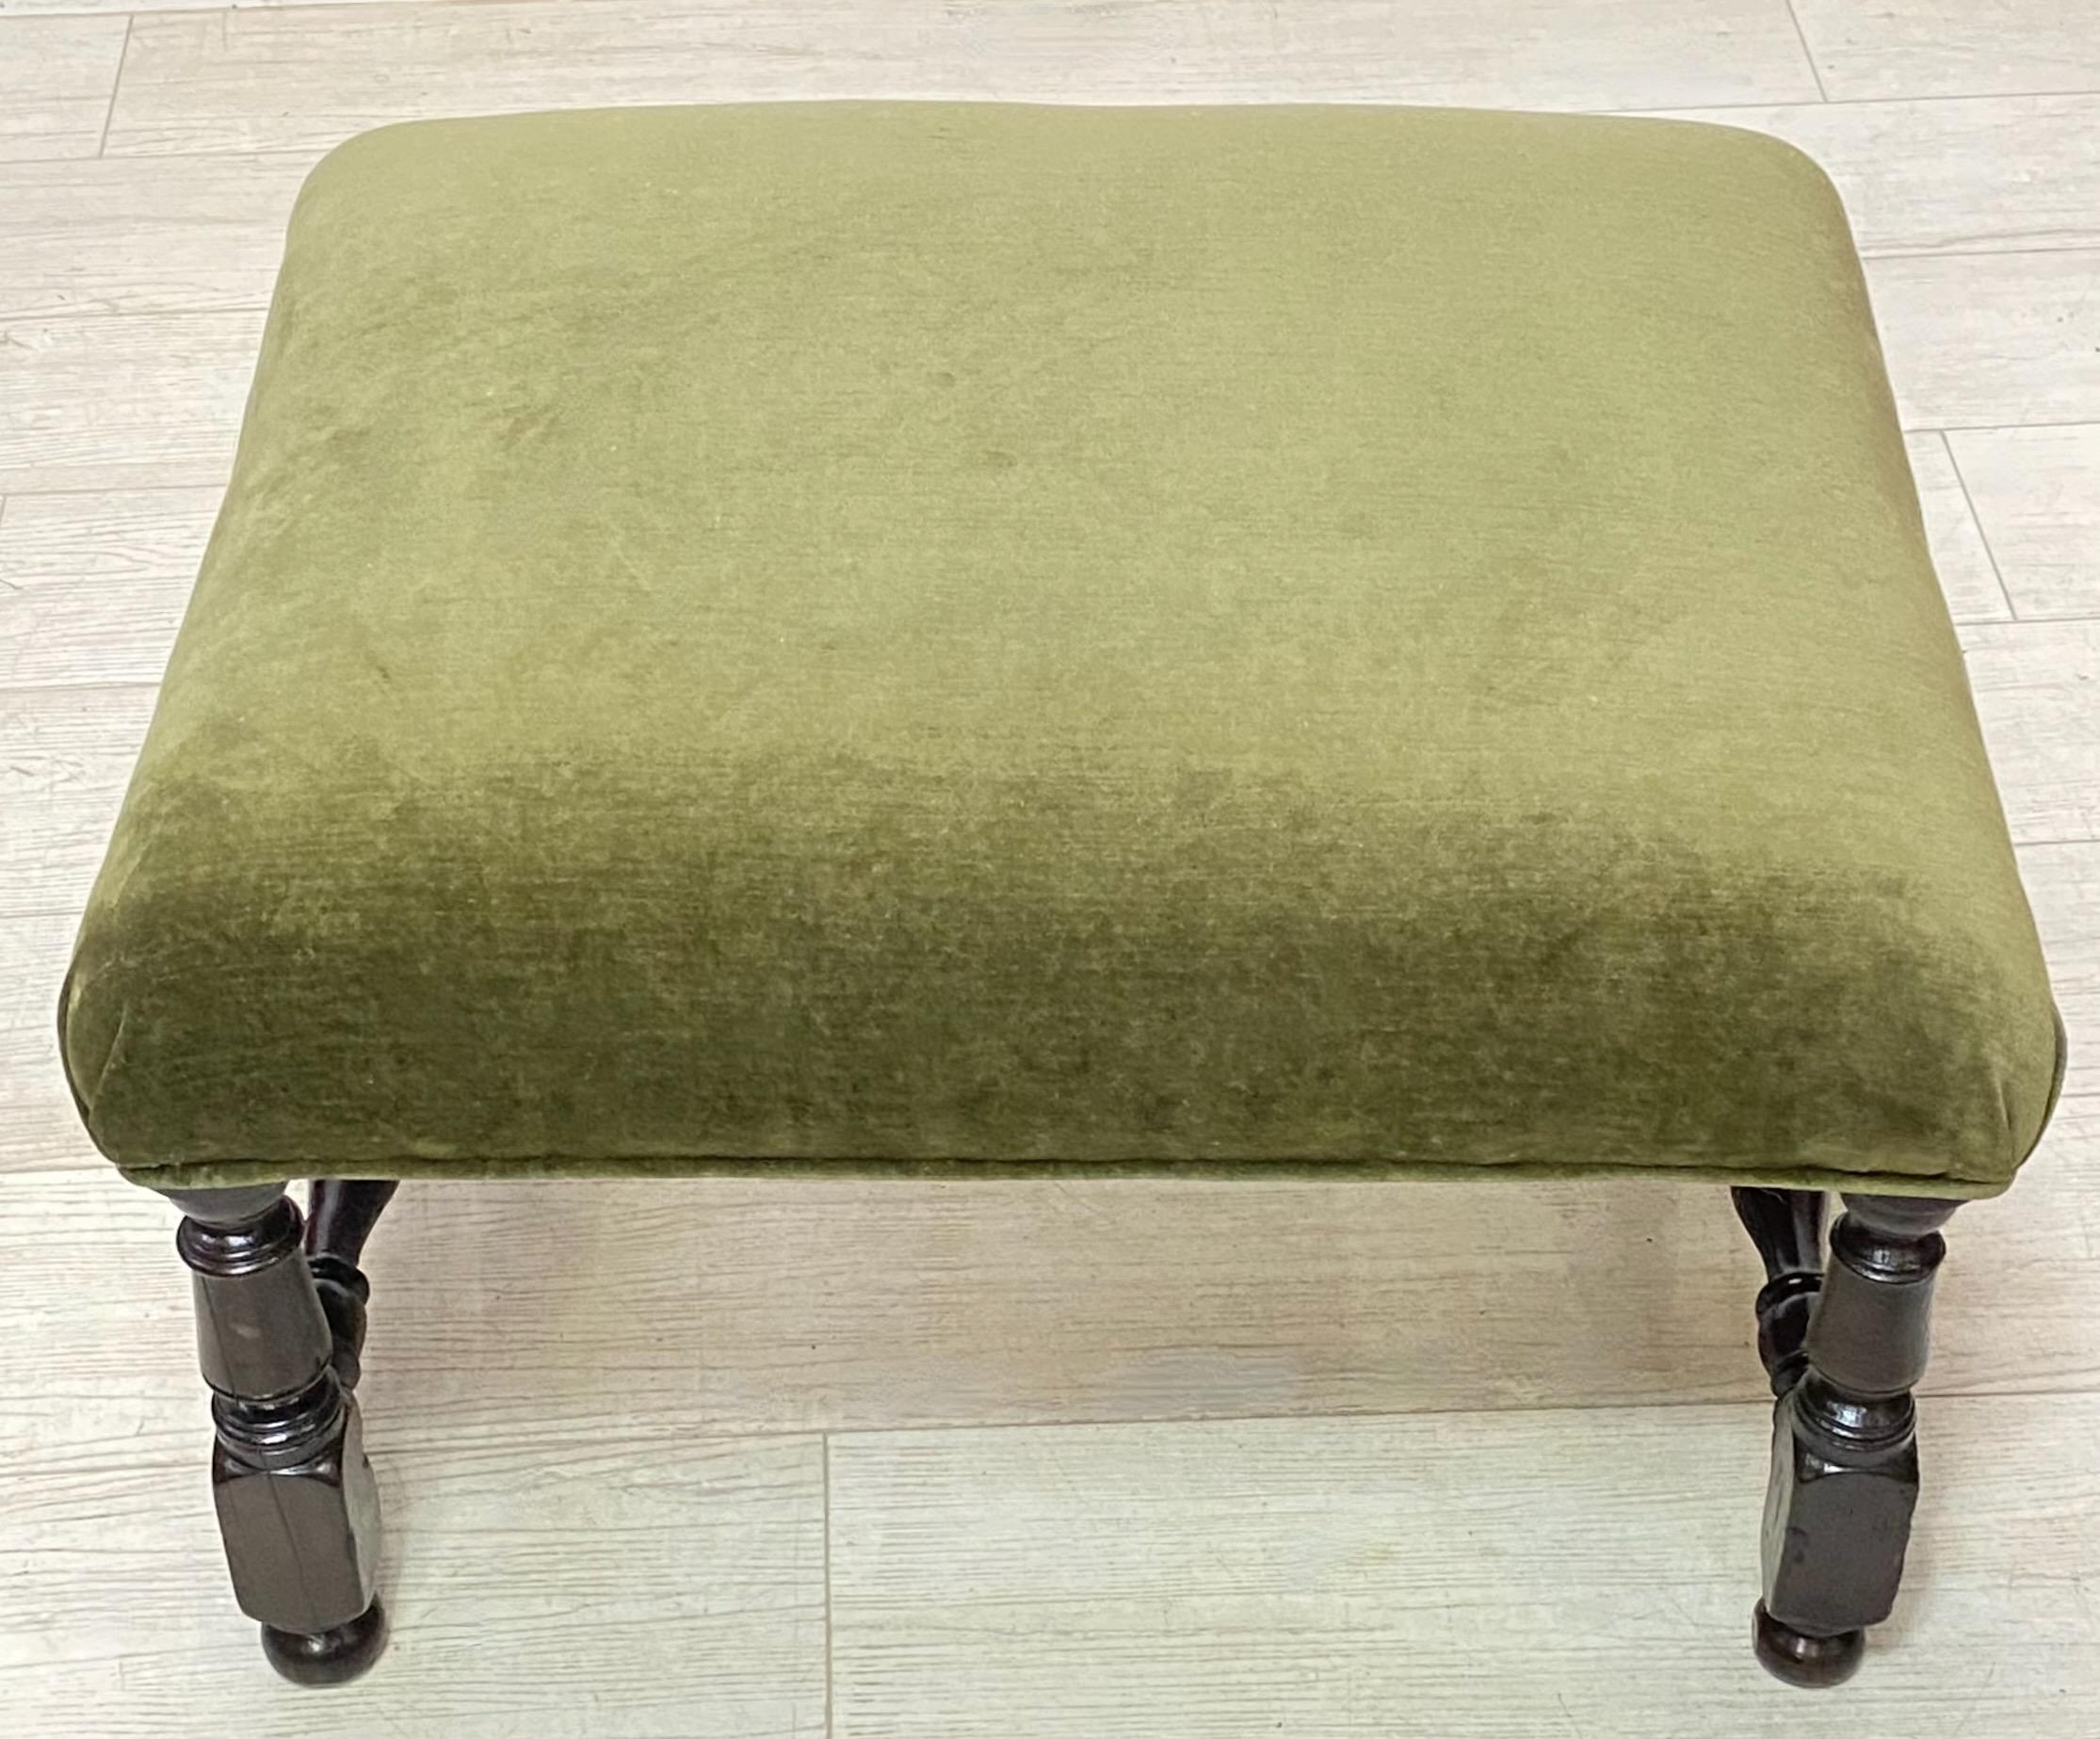 Traditional George III period oak foot stool with new velvet upholstery.
Having some old repairs but solid and sturdy. 
In very good antique condition.
England, late 18th century, circa 1790.